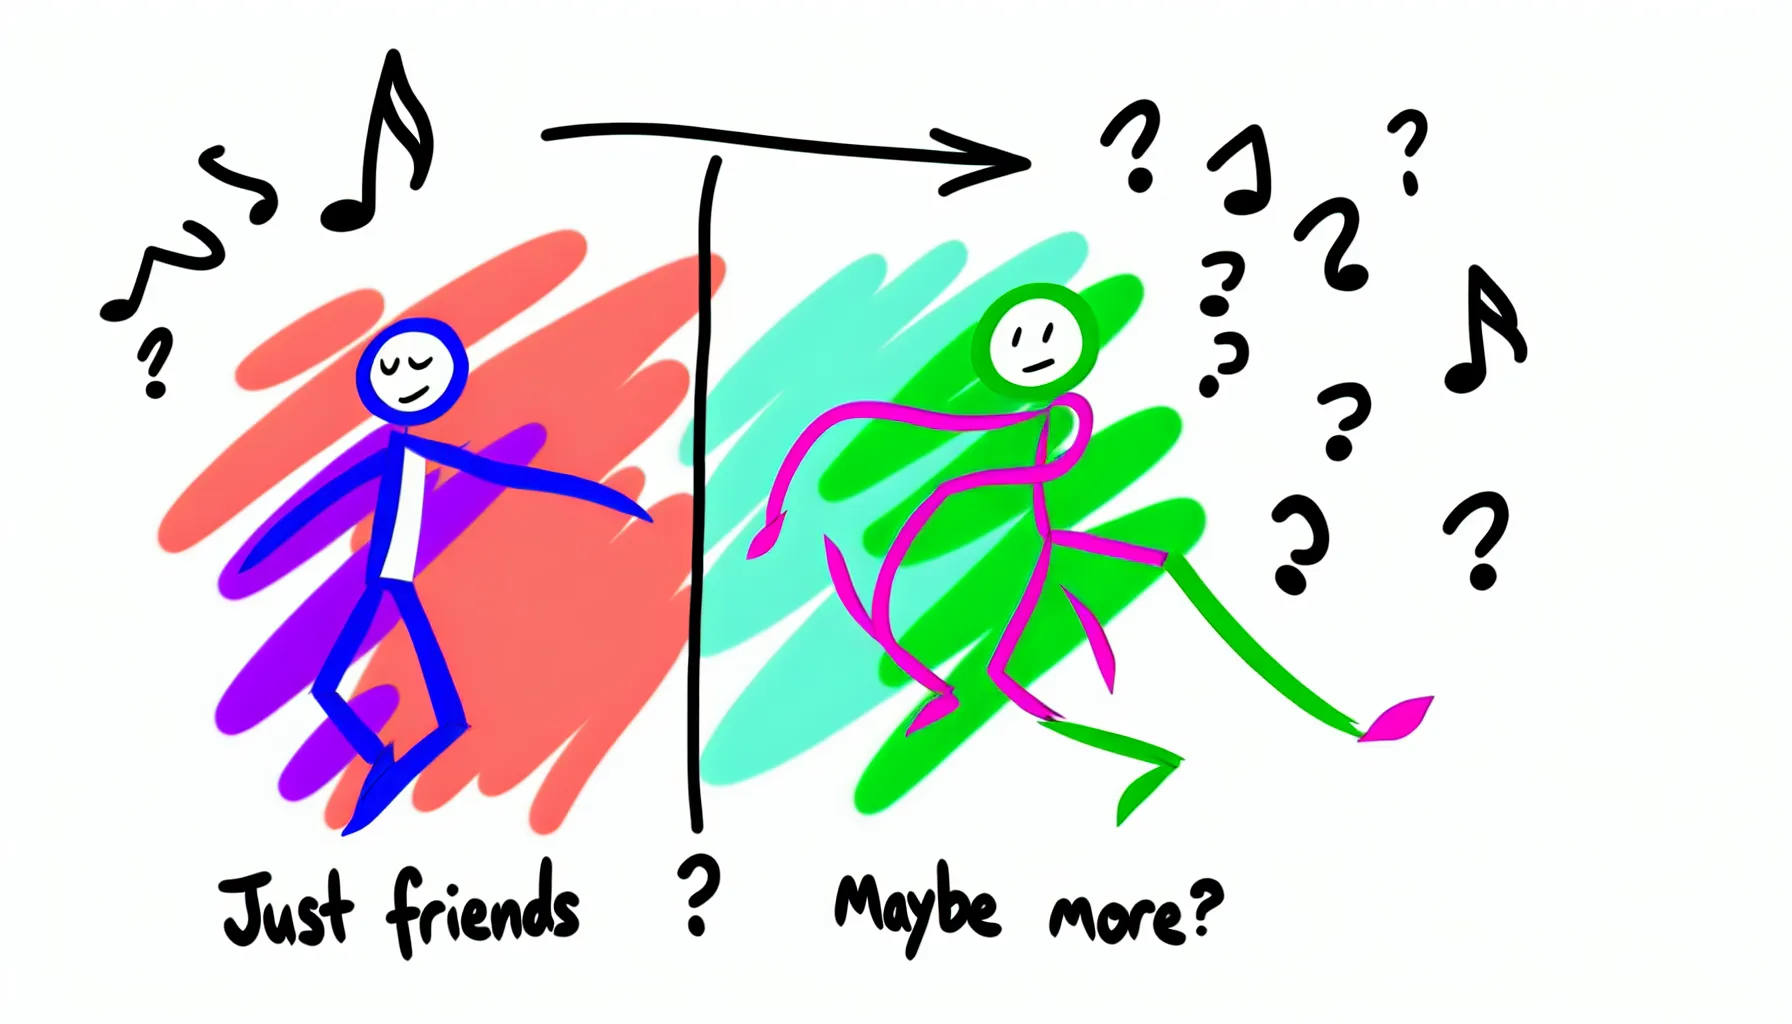 Friend Zone Tango illustration: Colorful stick figures dancing amidst musical notes and question marks